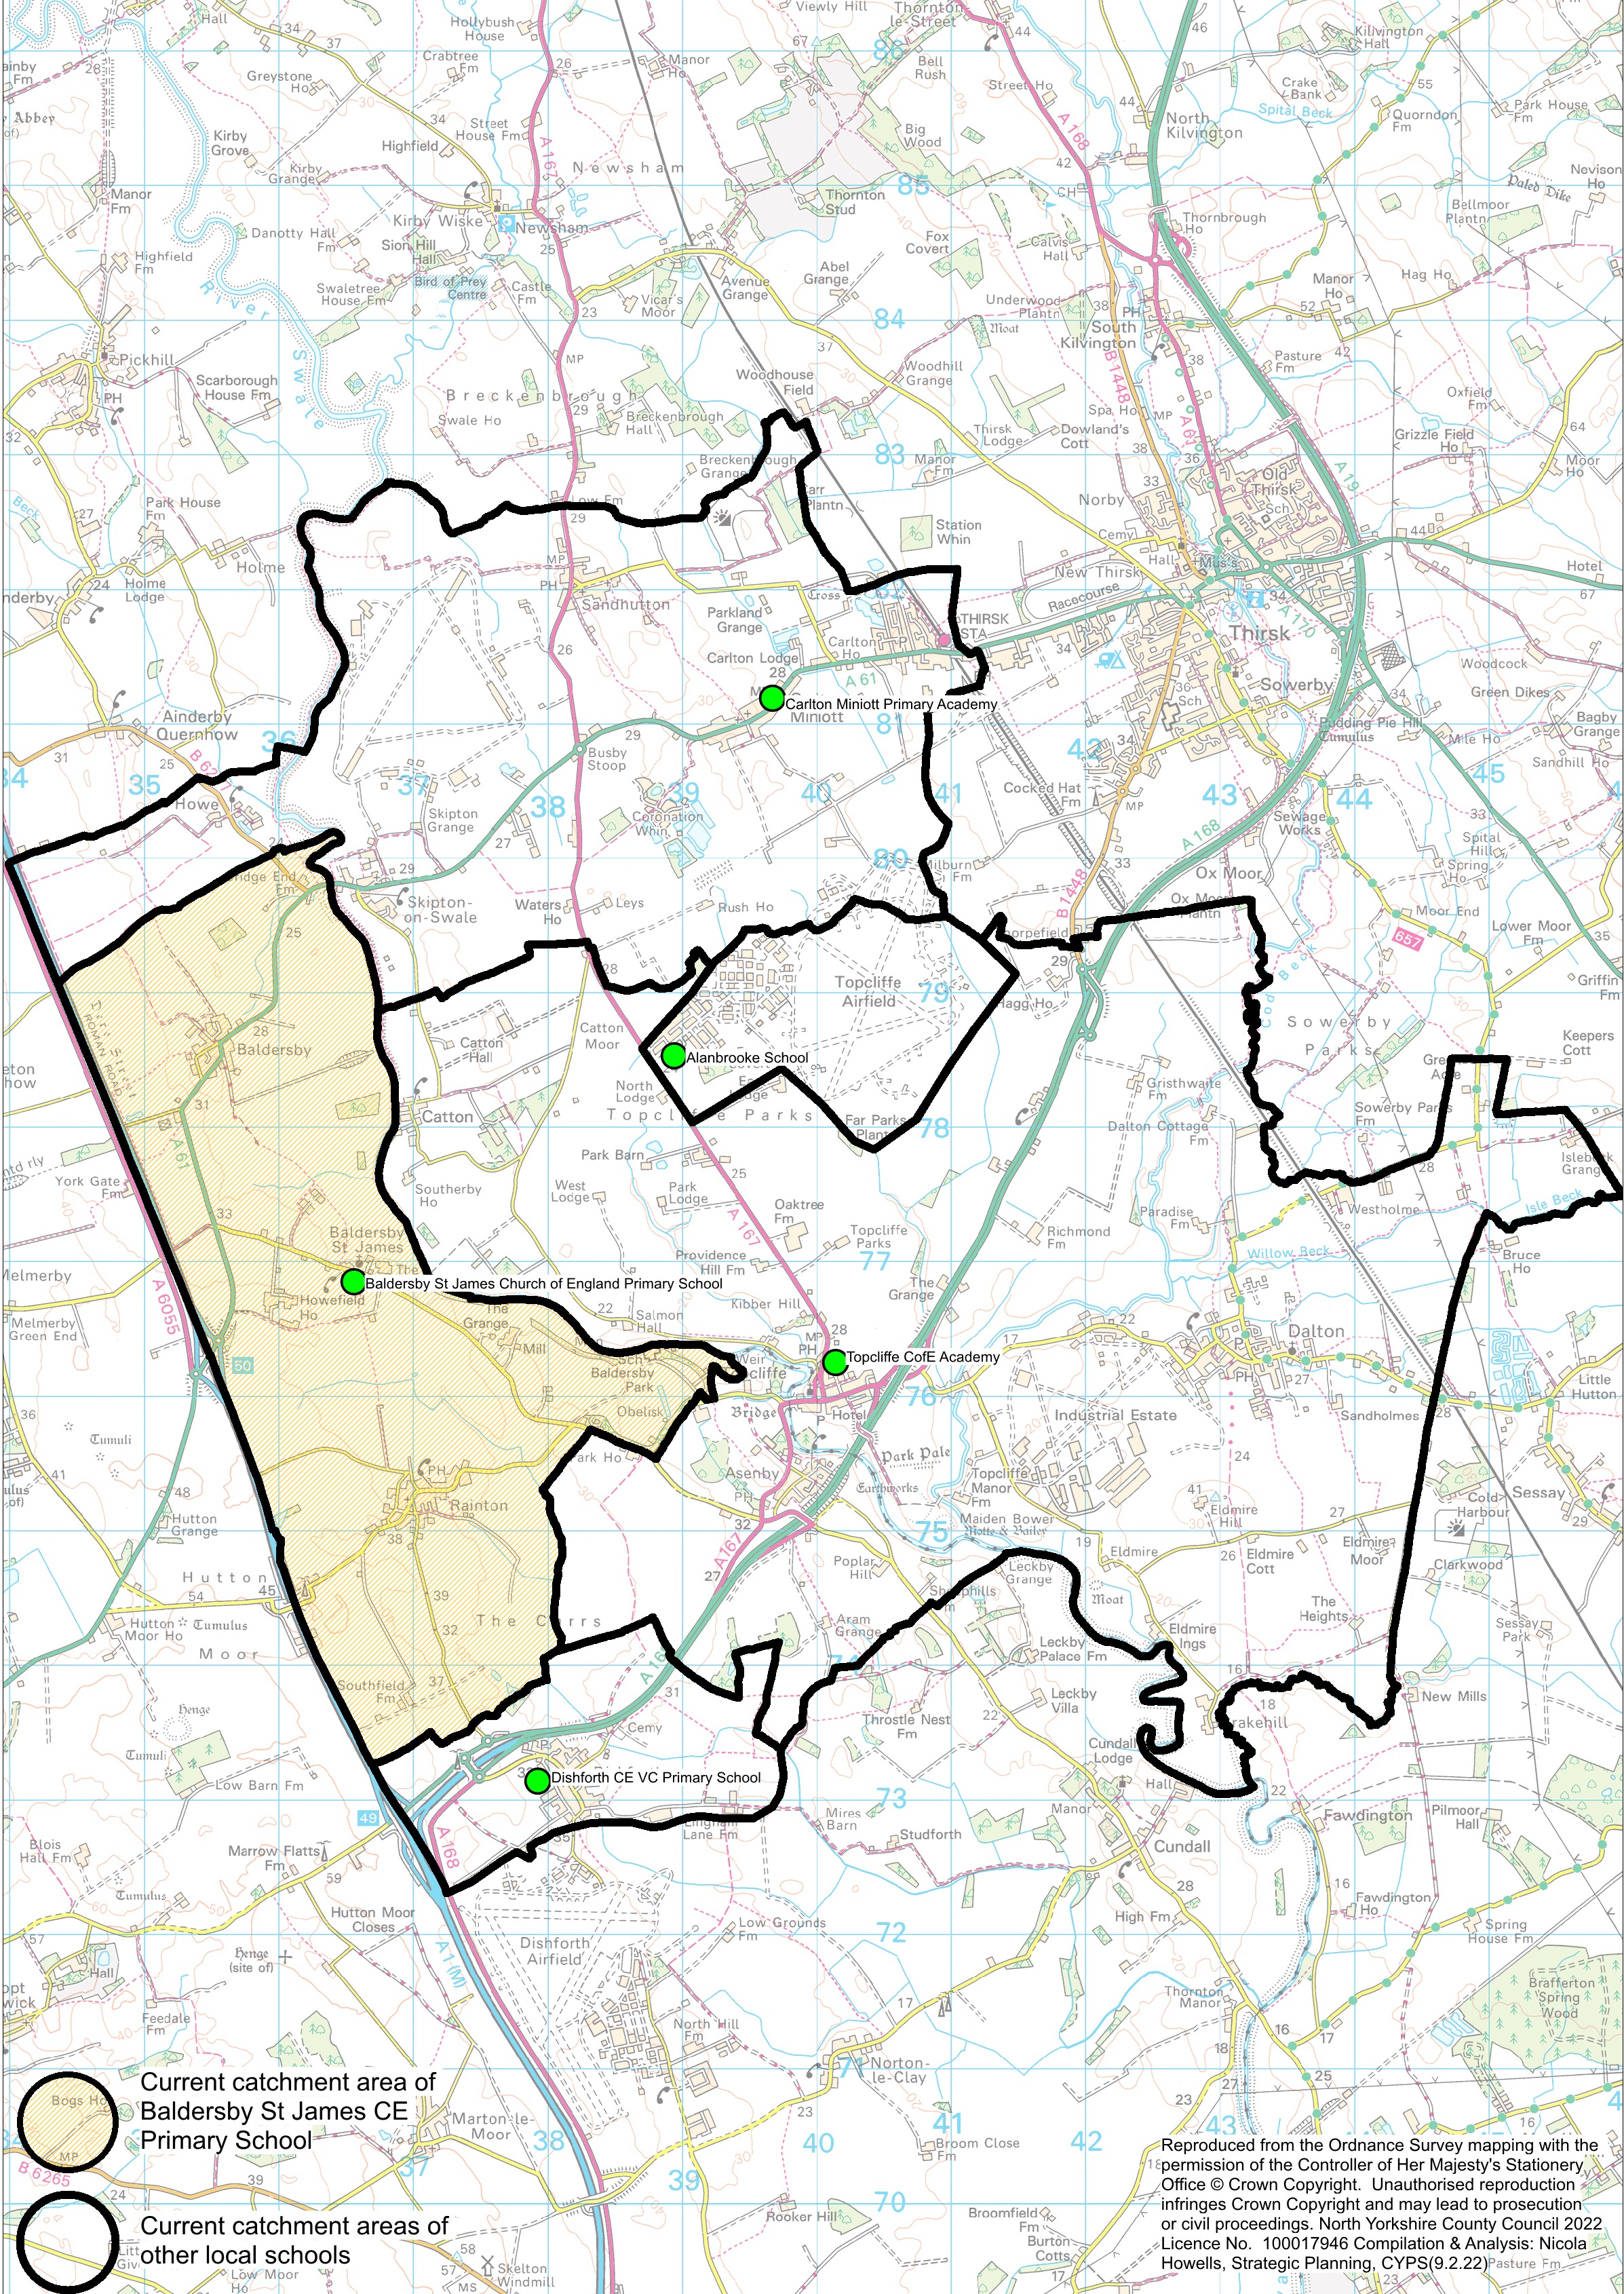 Local catchment areas of Baldersby